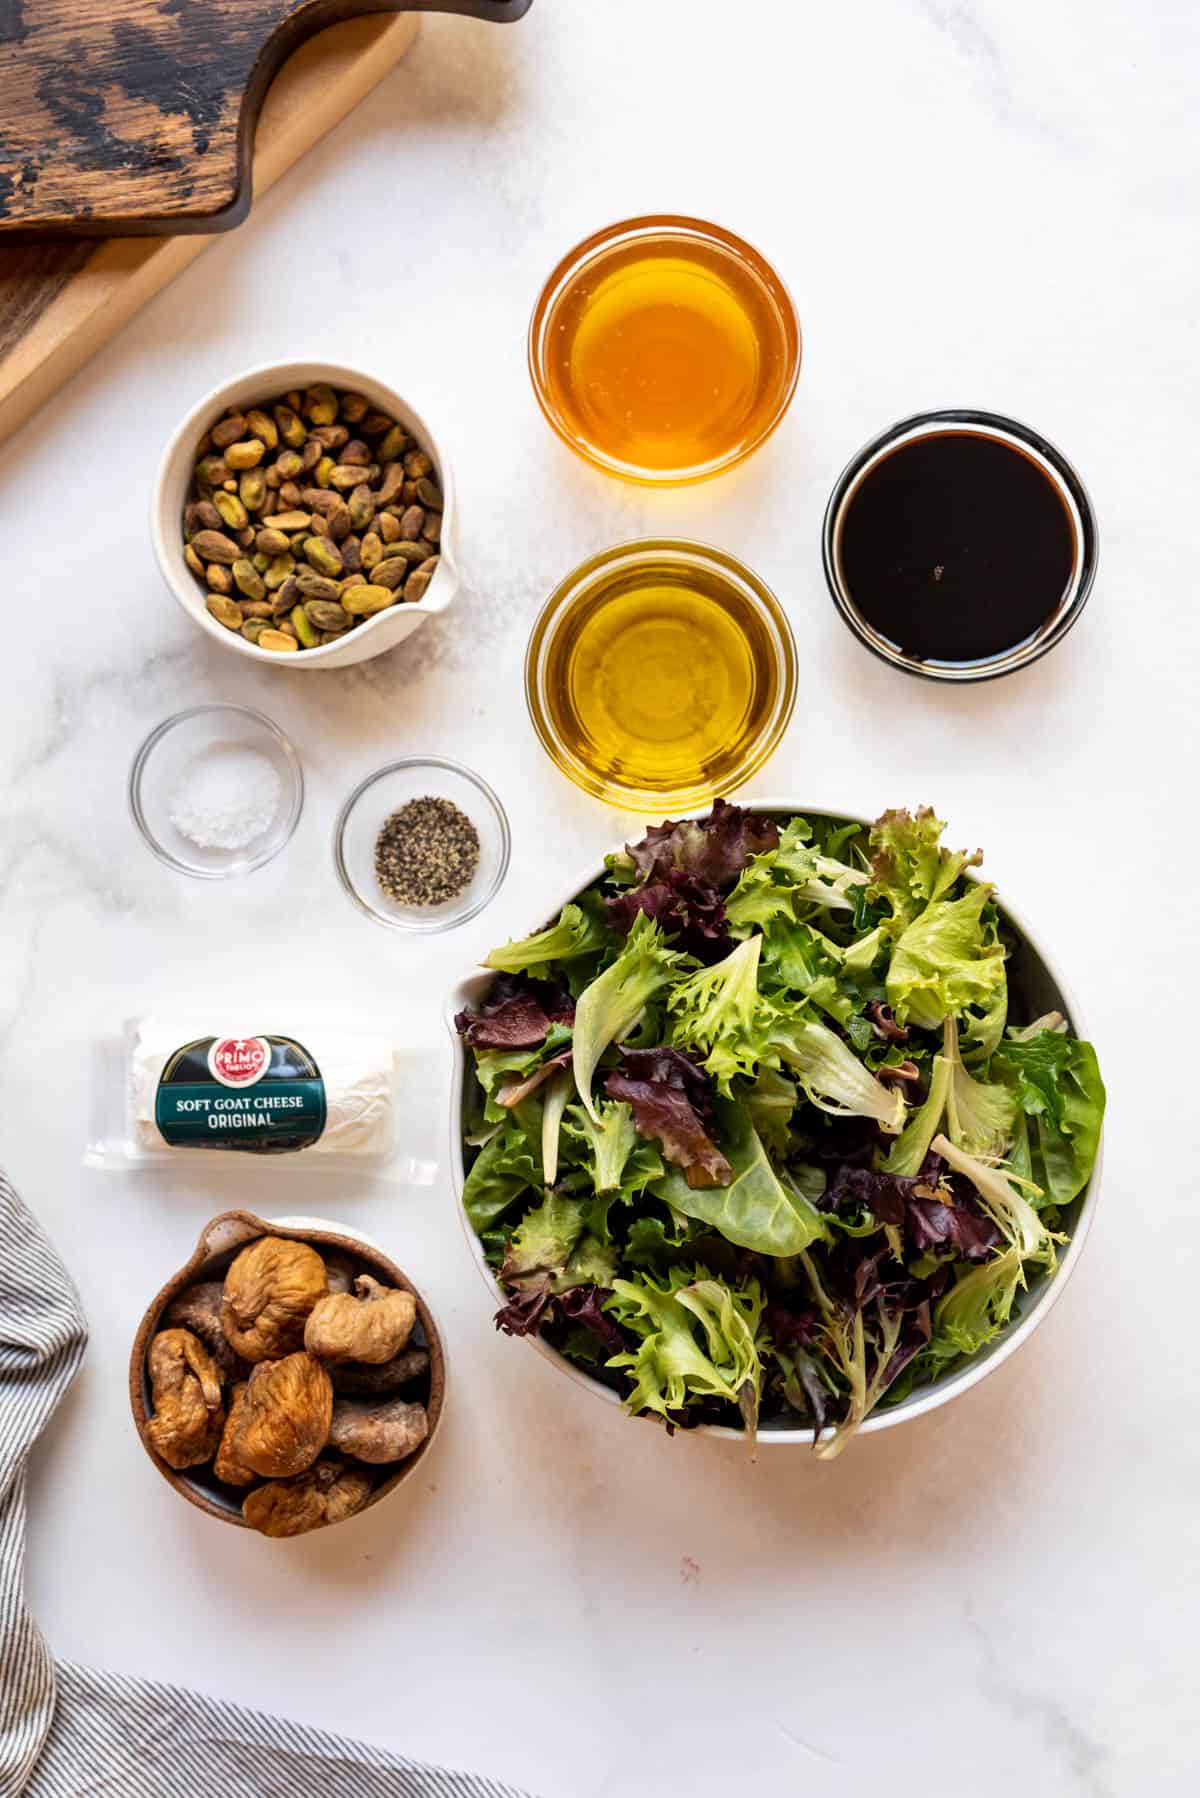 Ingredients for a fig & pistachio salad with easy balsamic dressing.